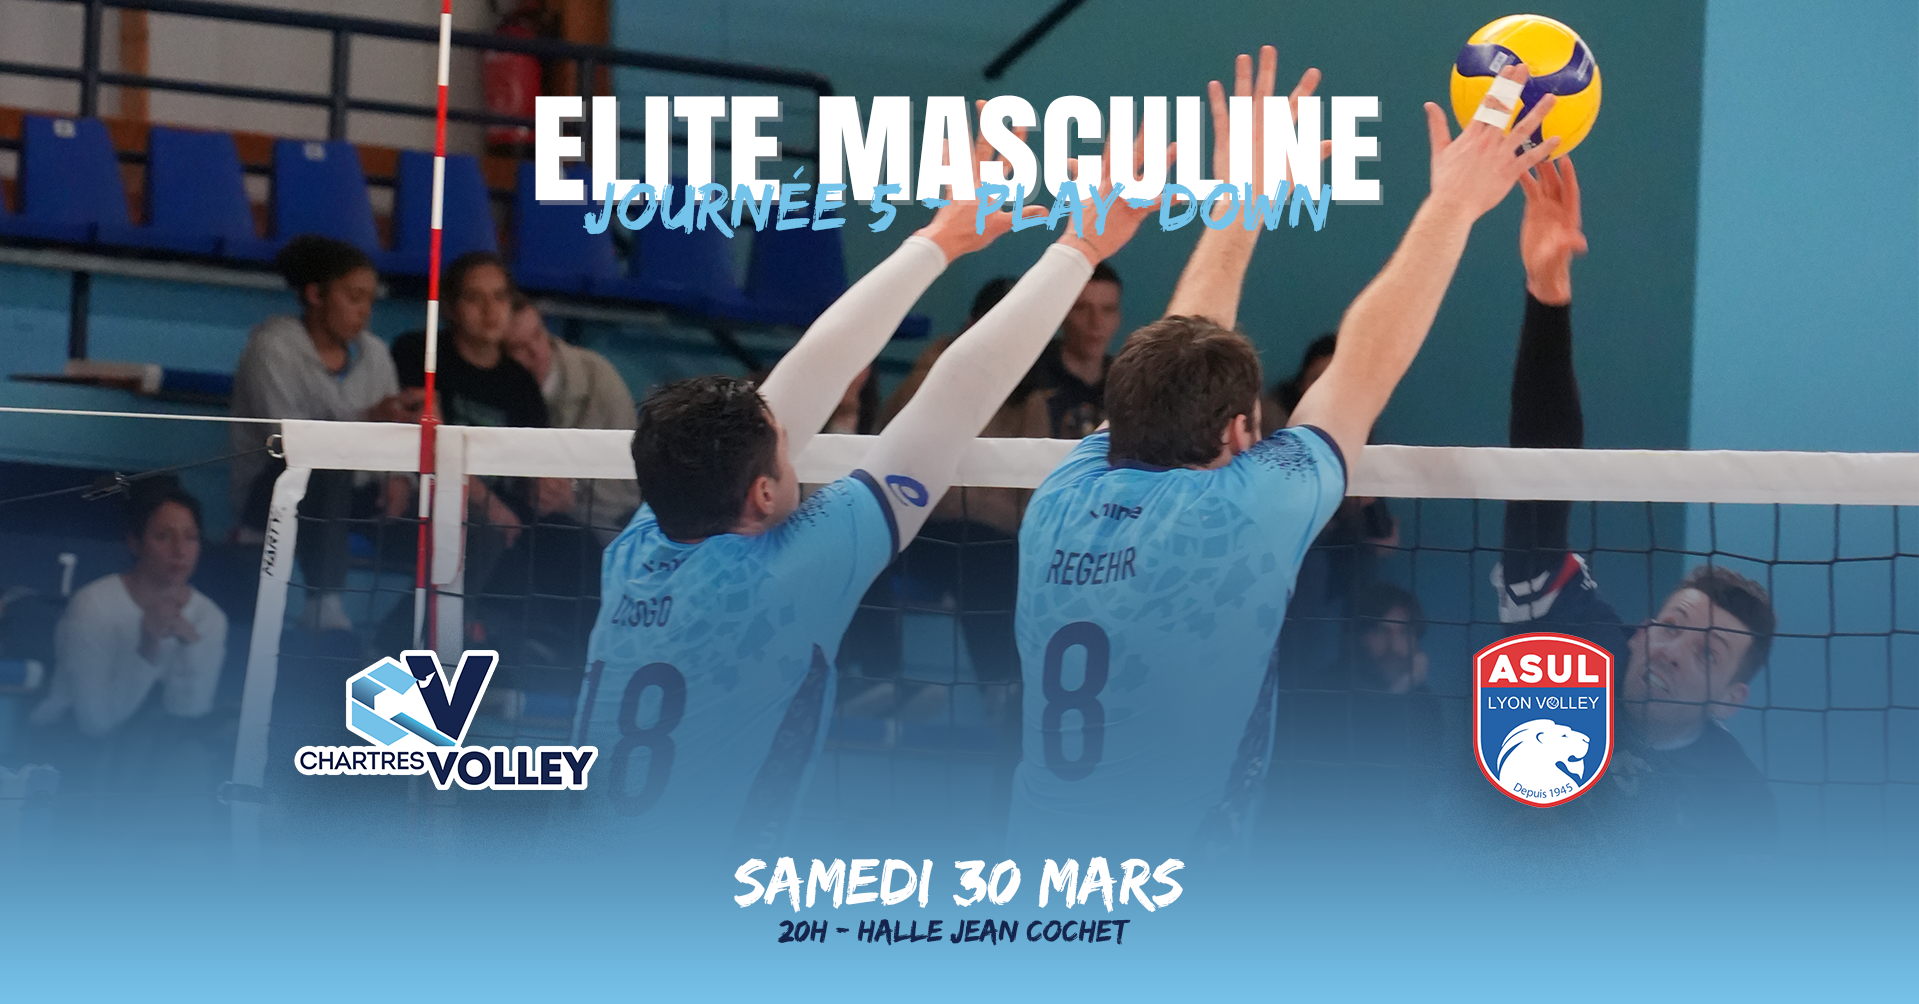 Billetterie ouverte : C'Chartres Volley - ASUL Lyon Volley